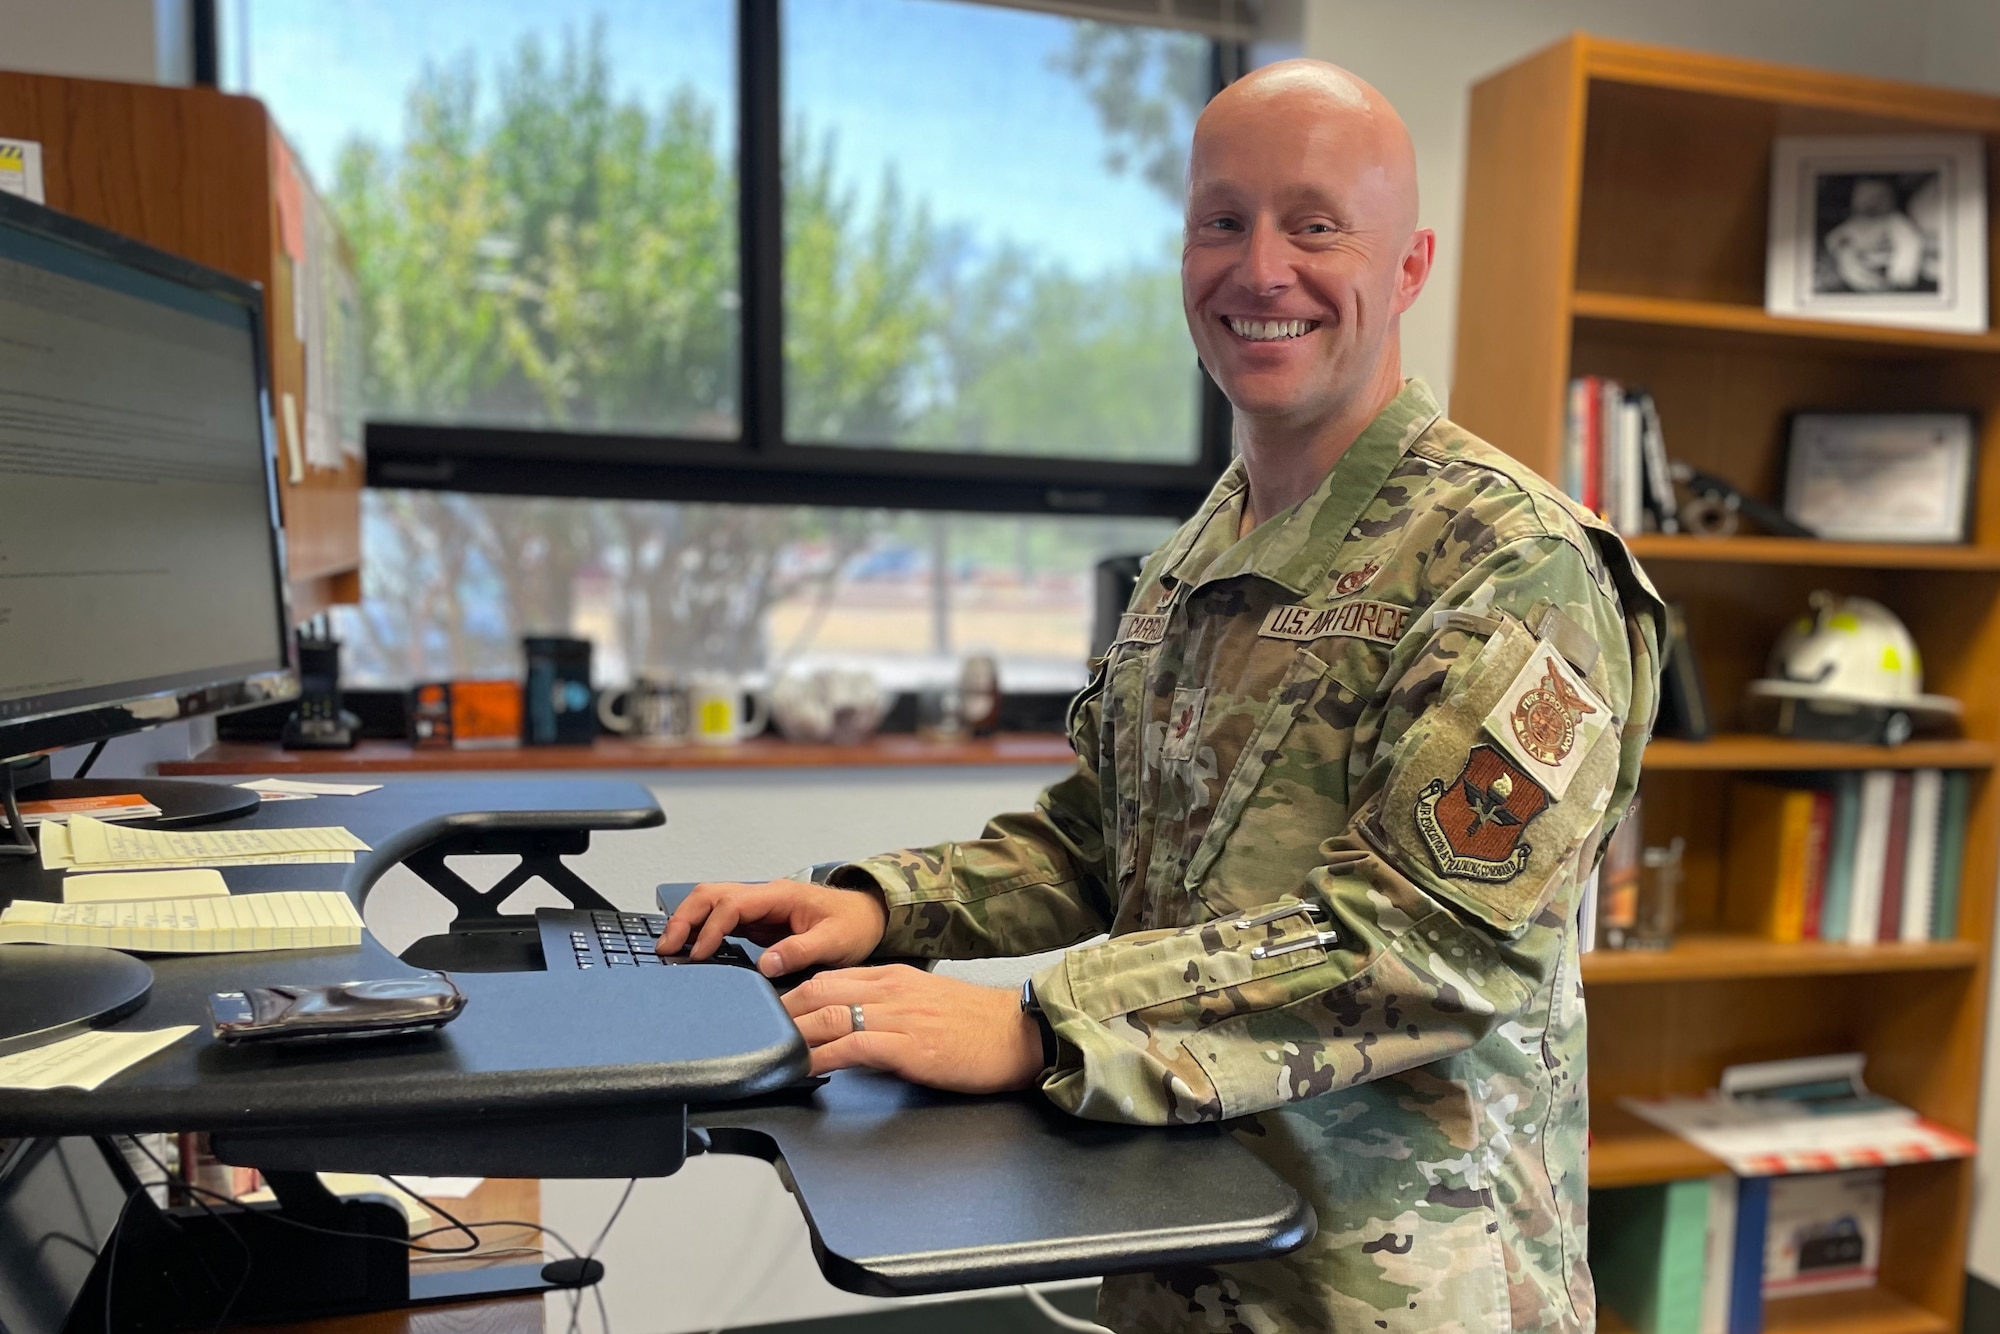 U.S. Air Force Maj. Joshua Carroll, 17th Civil Engineer Squadron commander, works at his desk, at Goodfellow Air Force Base, Texas, July 18, 2022. Carroll’s previous assignment was a student at the U.S. Army Command & General Staff College at Fort Leavenworth, Kansas. (U.S. Air Force photo by Senior Airman Abbey Rieves)